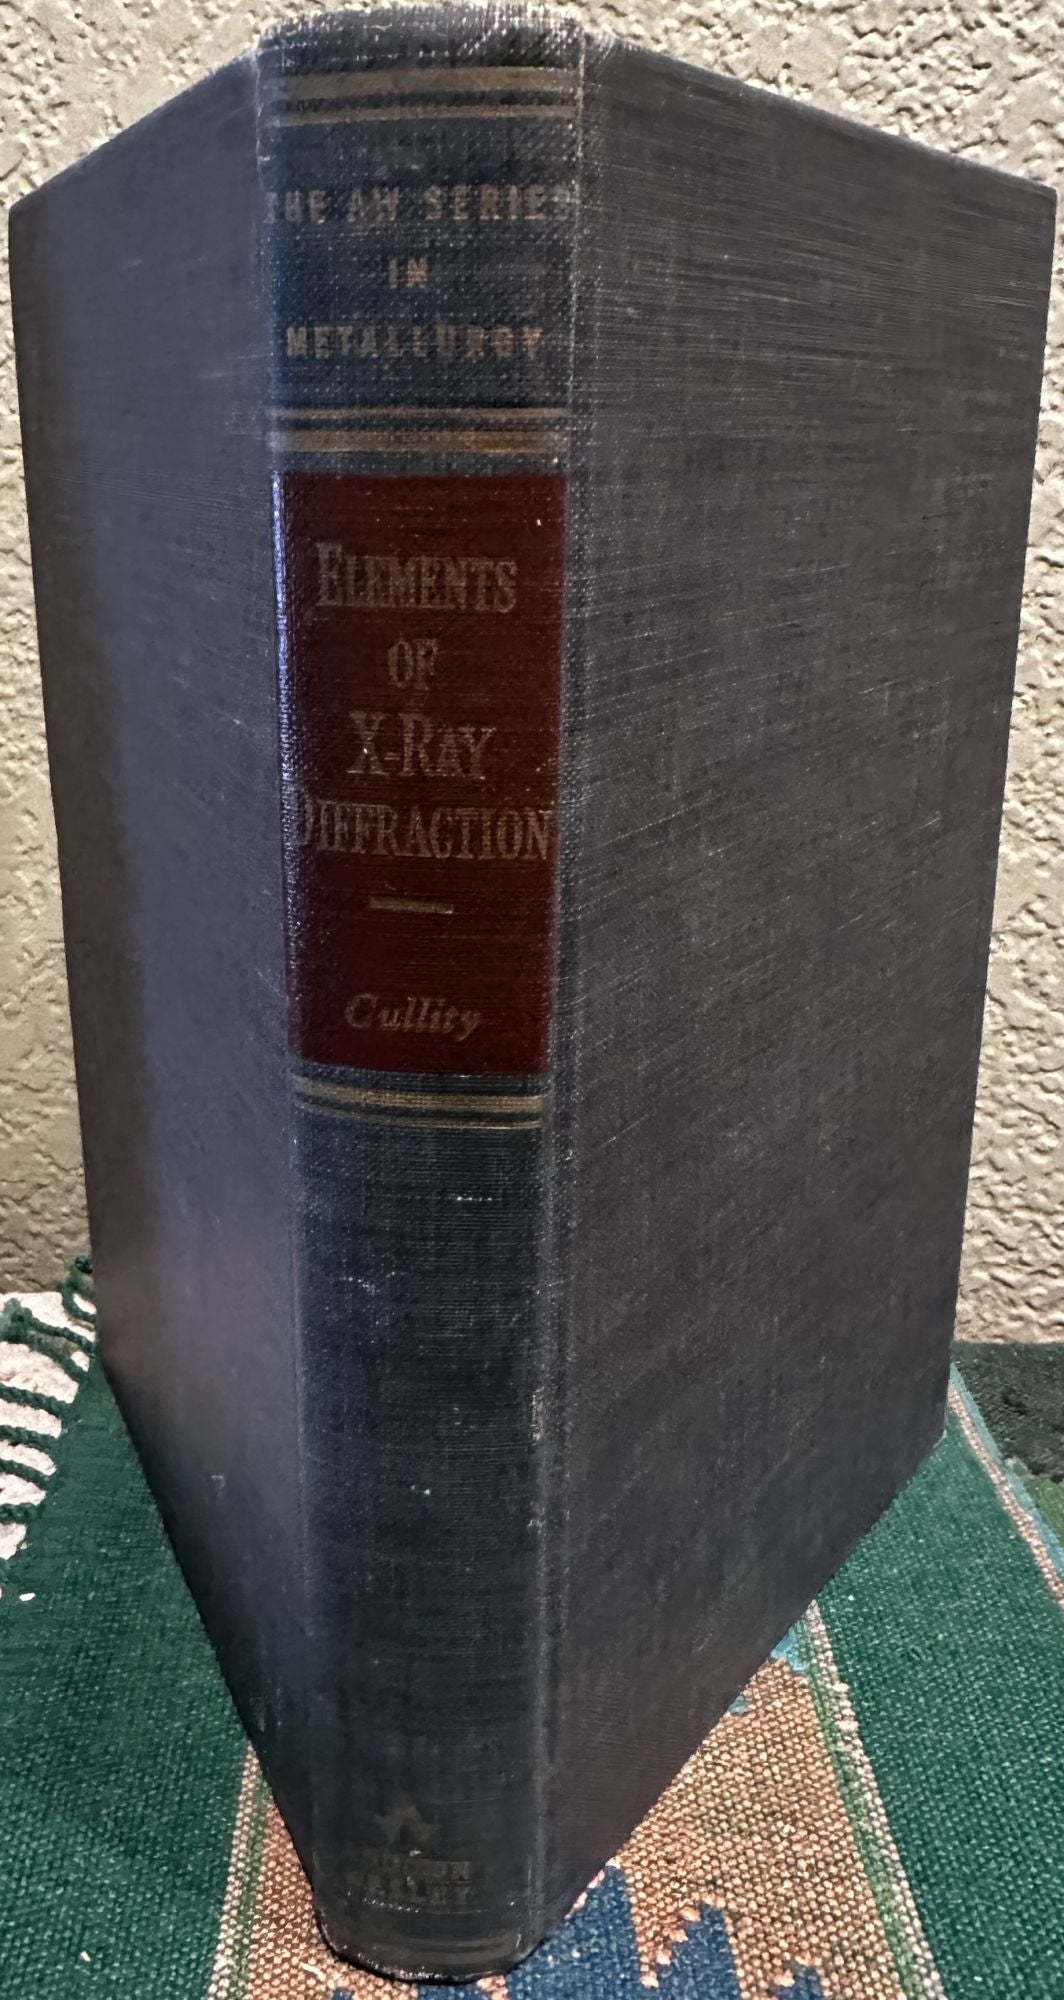 Elements of X-Ray Diffraction. B. D. Cullity.